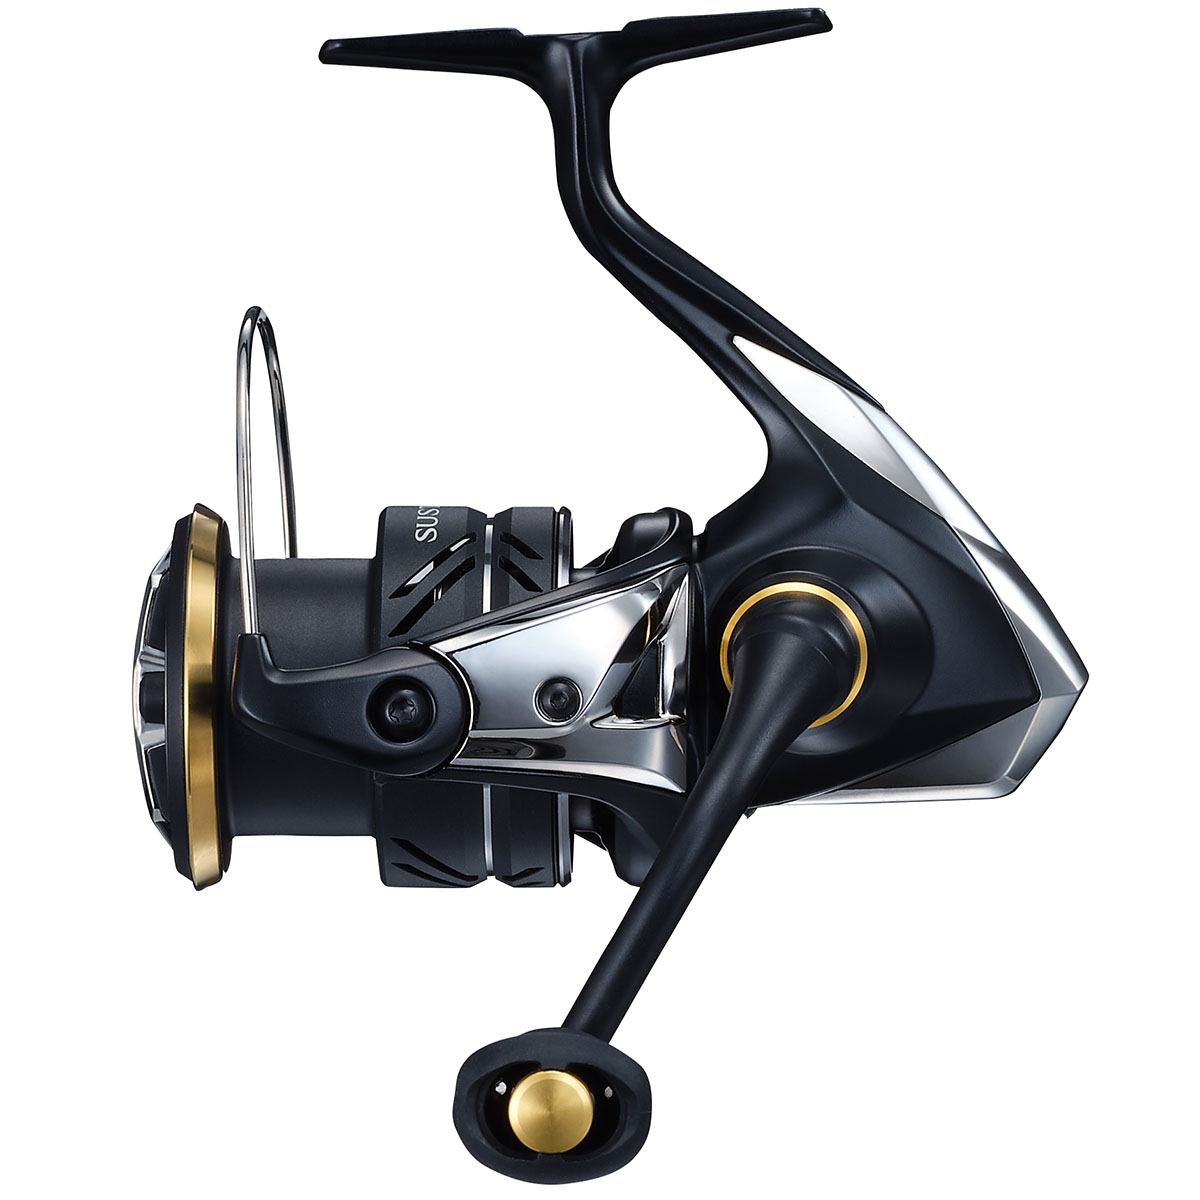 NEW SHIMANO SYNCOPATE 4000 FG Spinning Reel QUICK FAST CAST 4